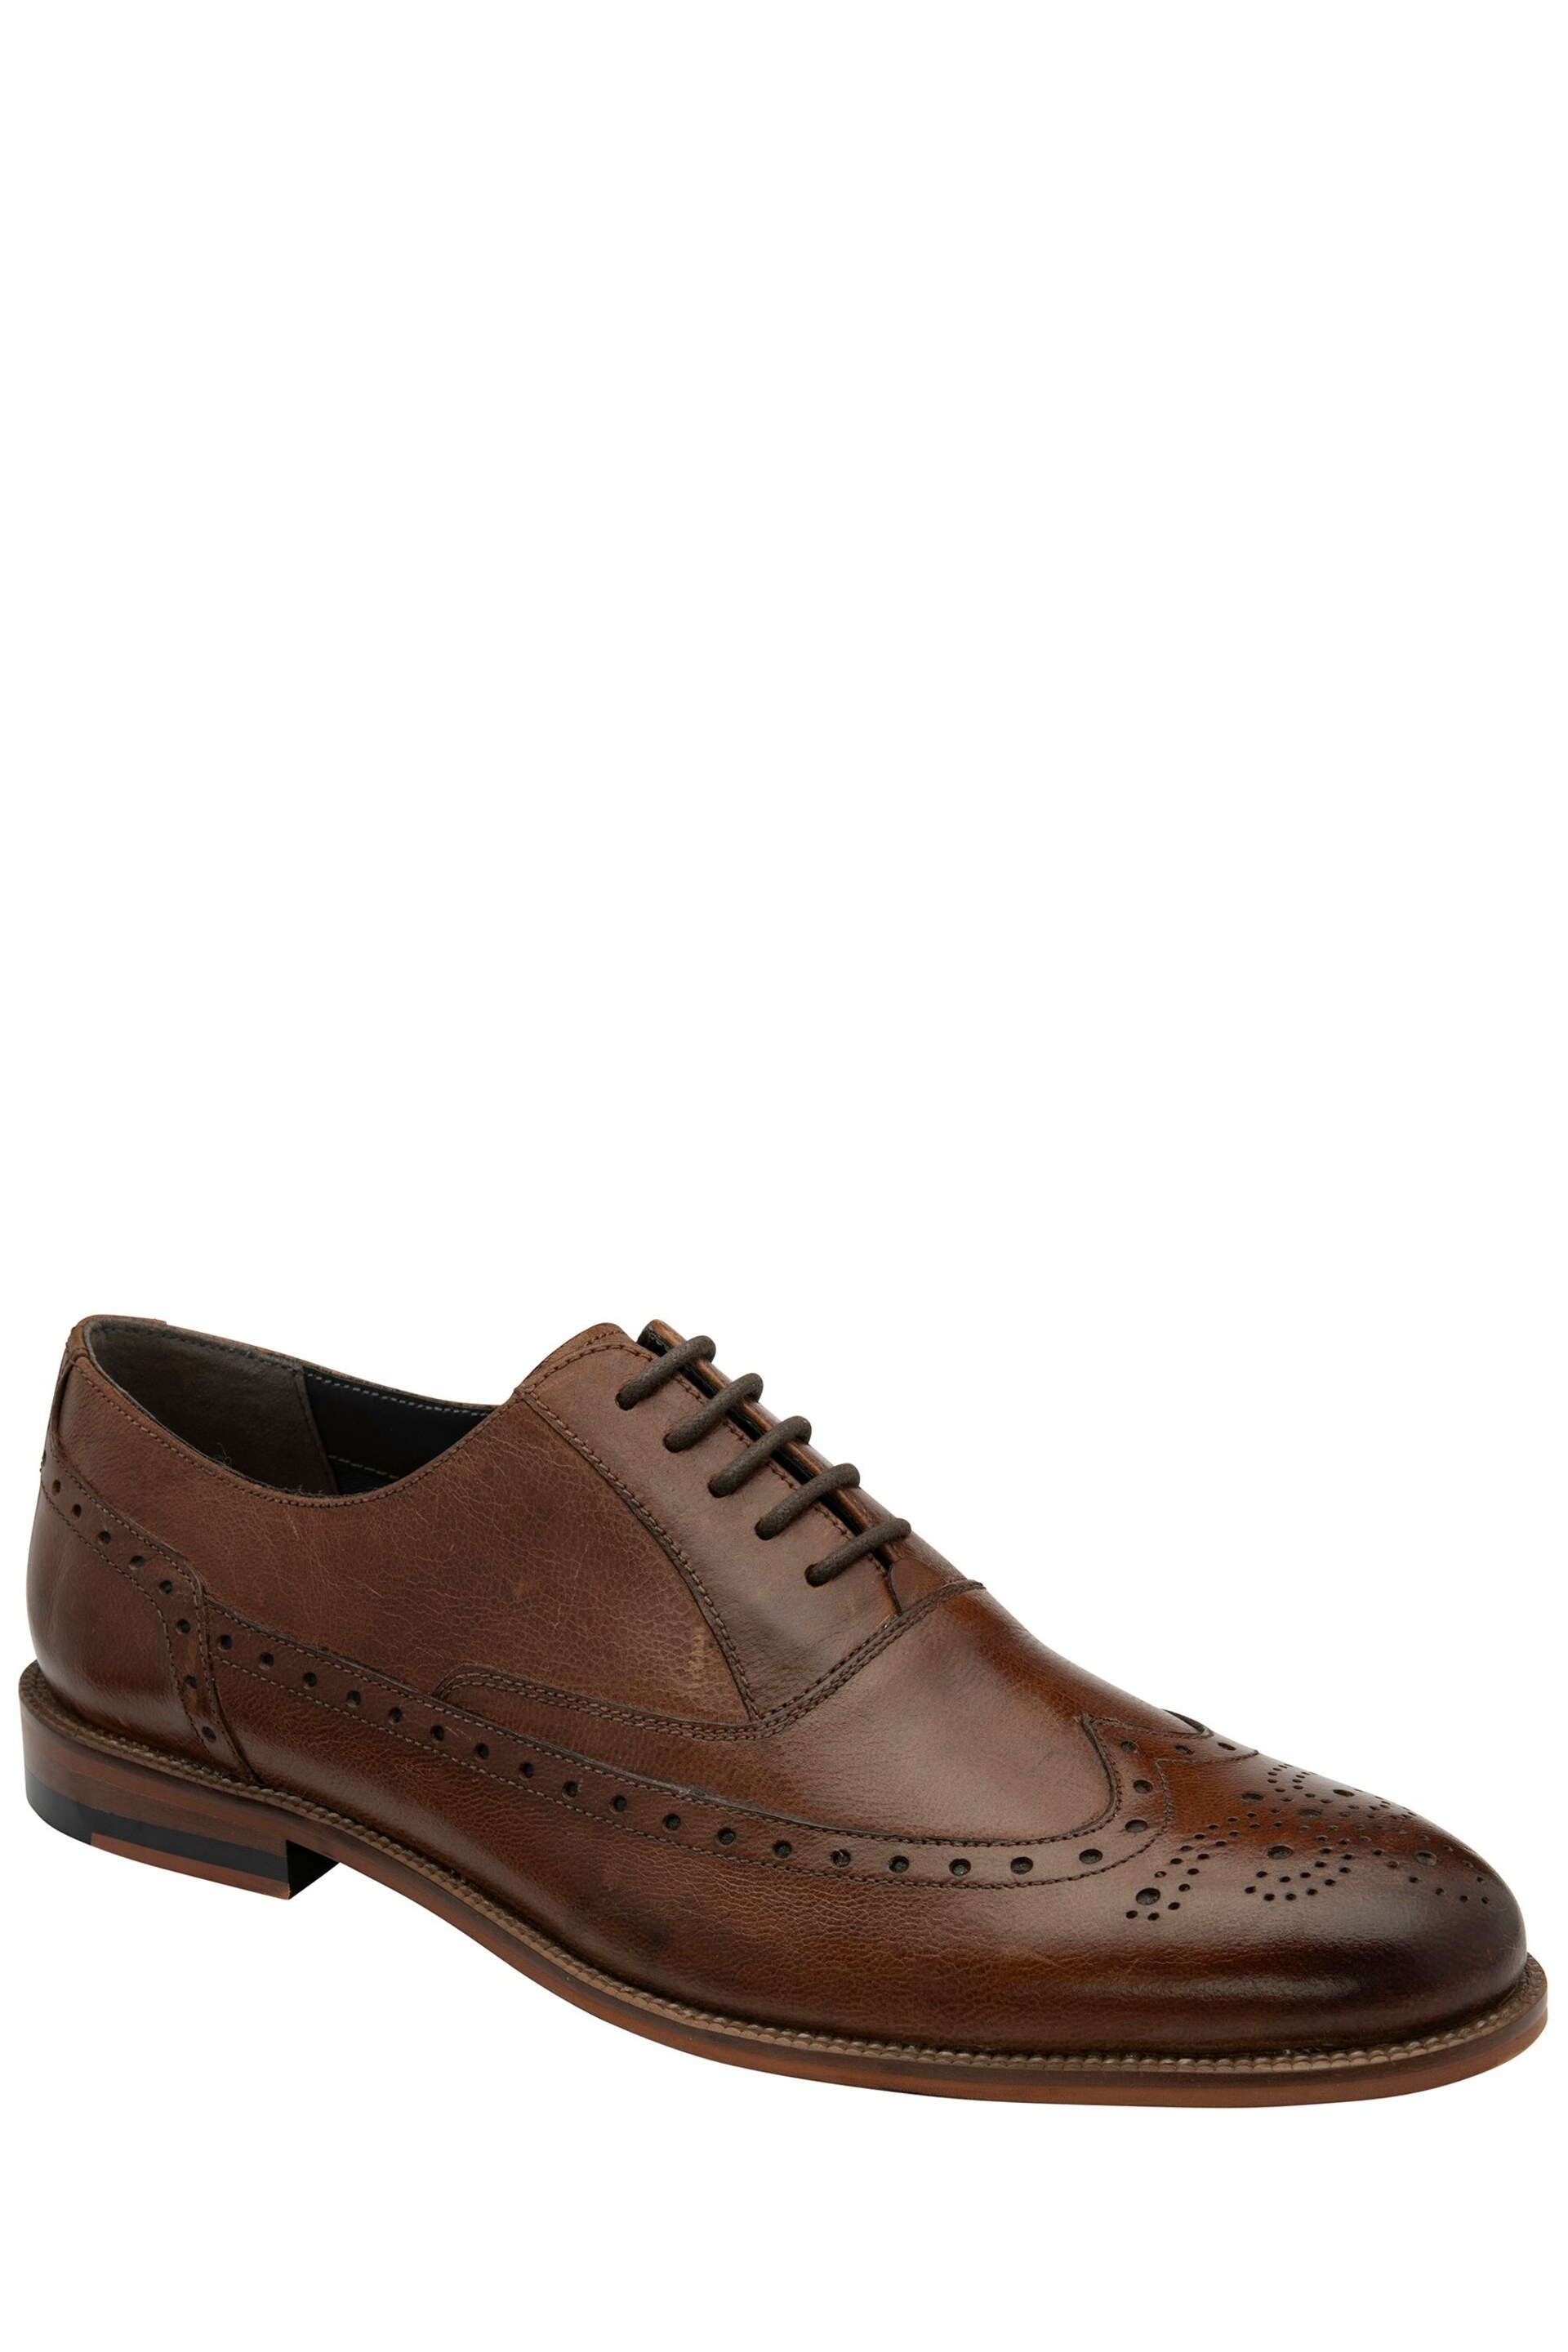 Frank Wright Brown Leather Lace-Up Mens Brogues - Image 1 of 4